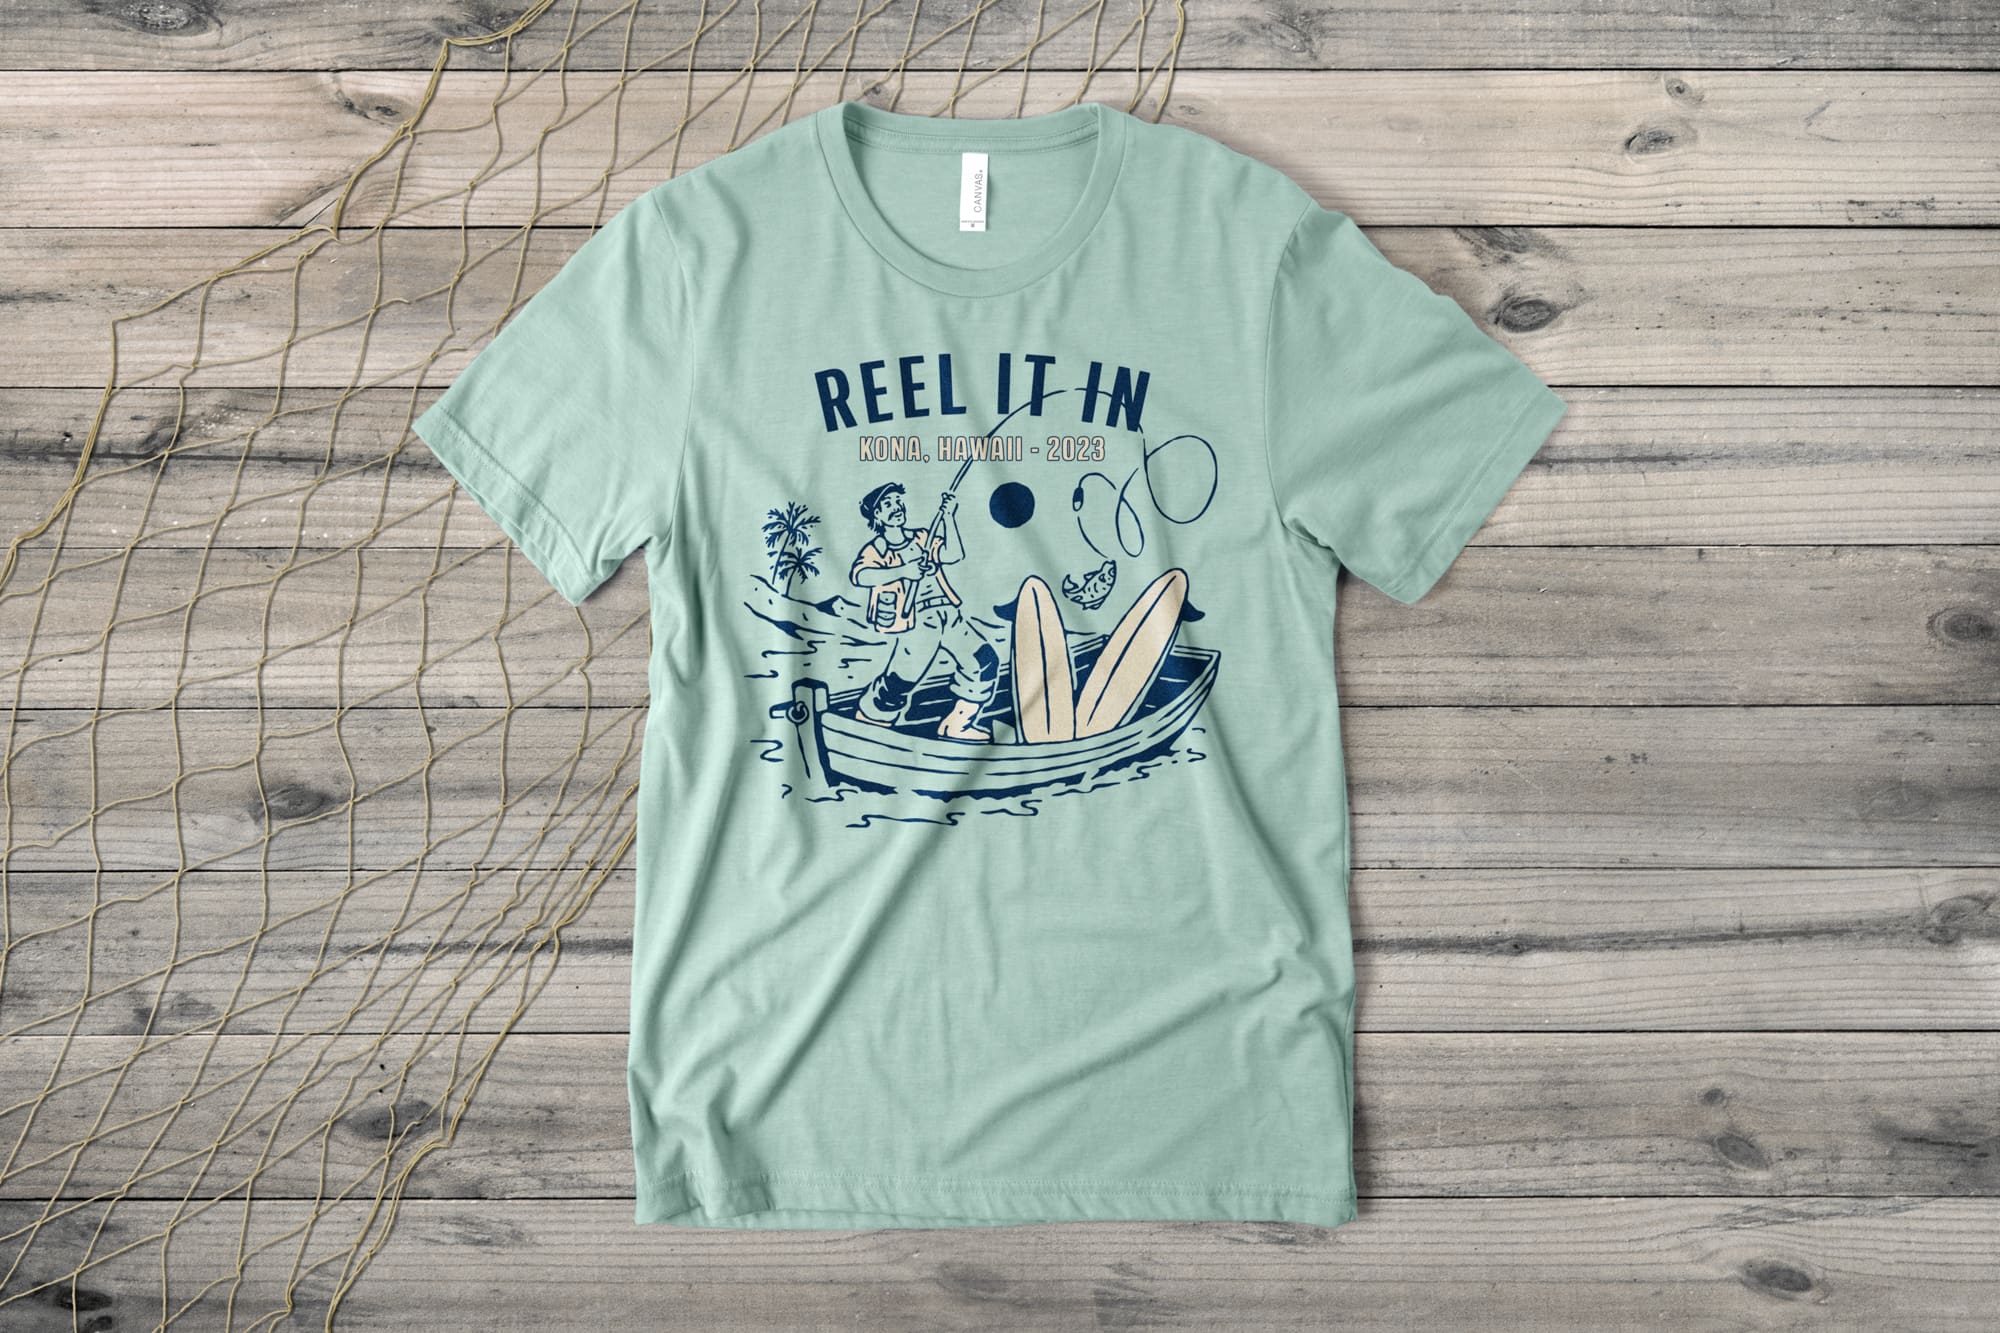 Custom t-shirt with a fishing themed template on the shirt. It says "Reel it In. Kona, Hawaii 2023"